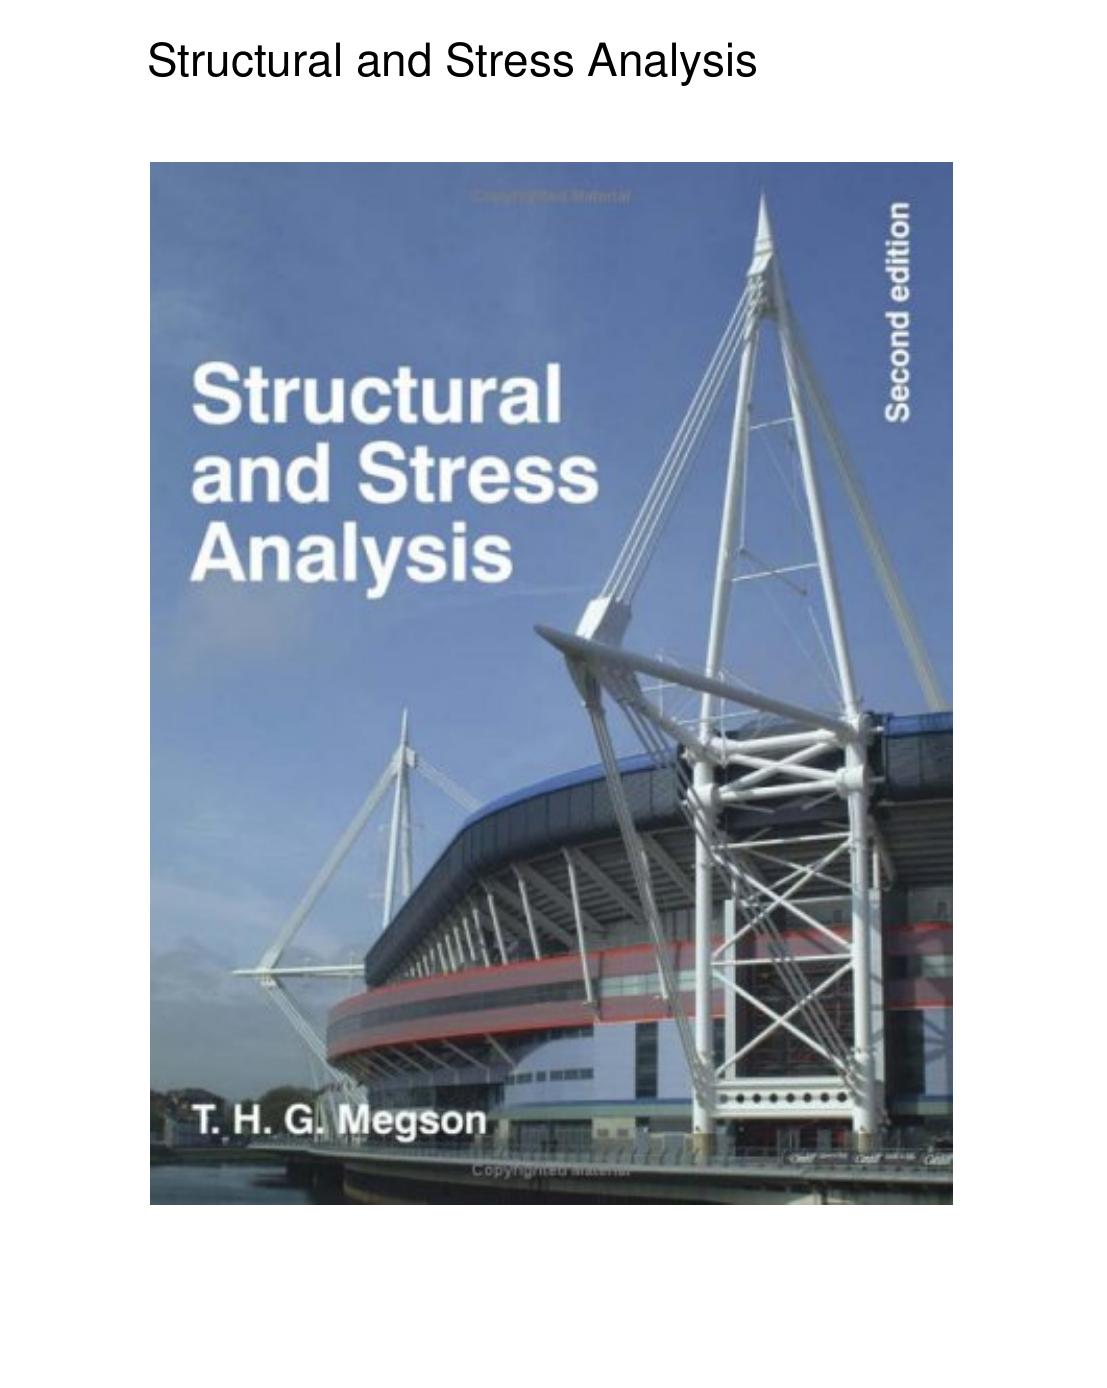 Structural and Stress Analysis, 2e